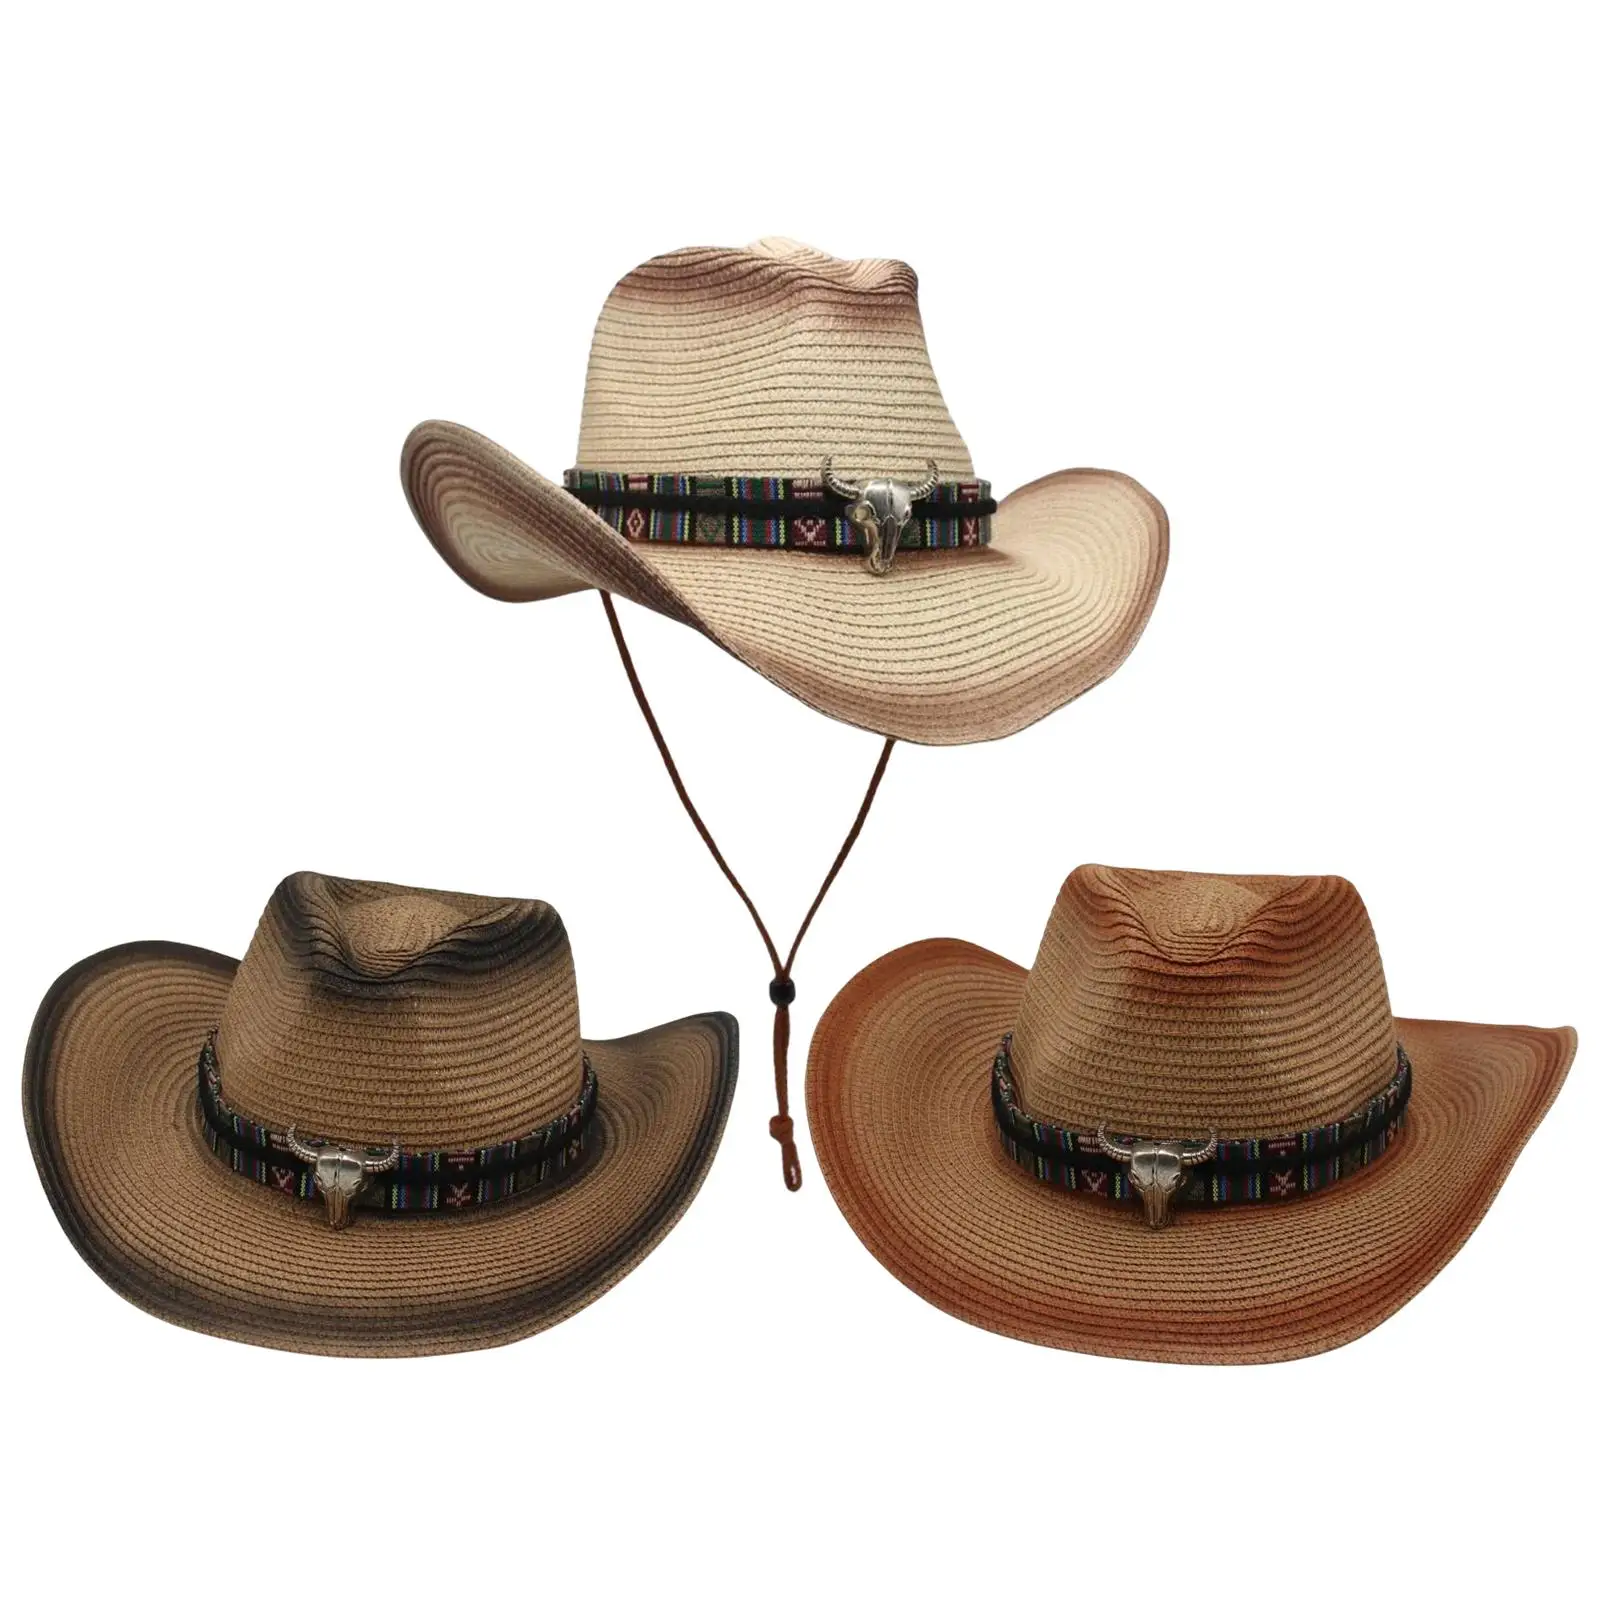 Fashionable Western Cowboy Hat Wide Costume Shapeable Cowgirl Hat Sunshade Hat for Teens Holiday Fishing Outdoor Leisure Summer